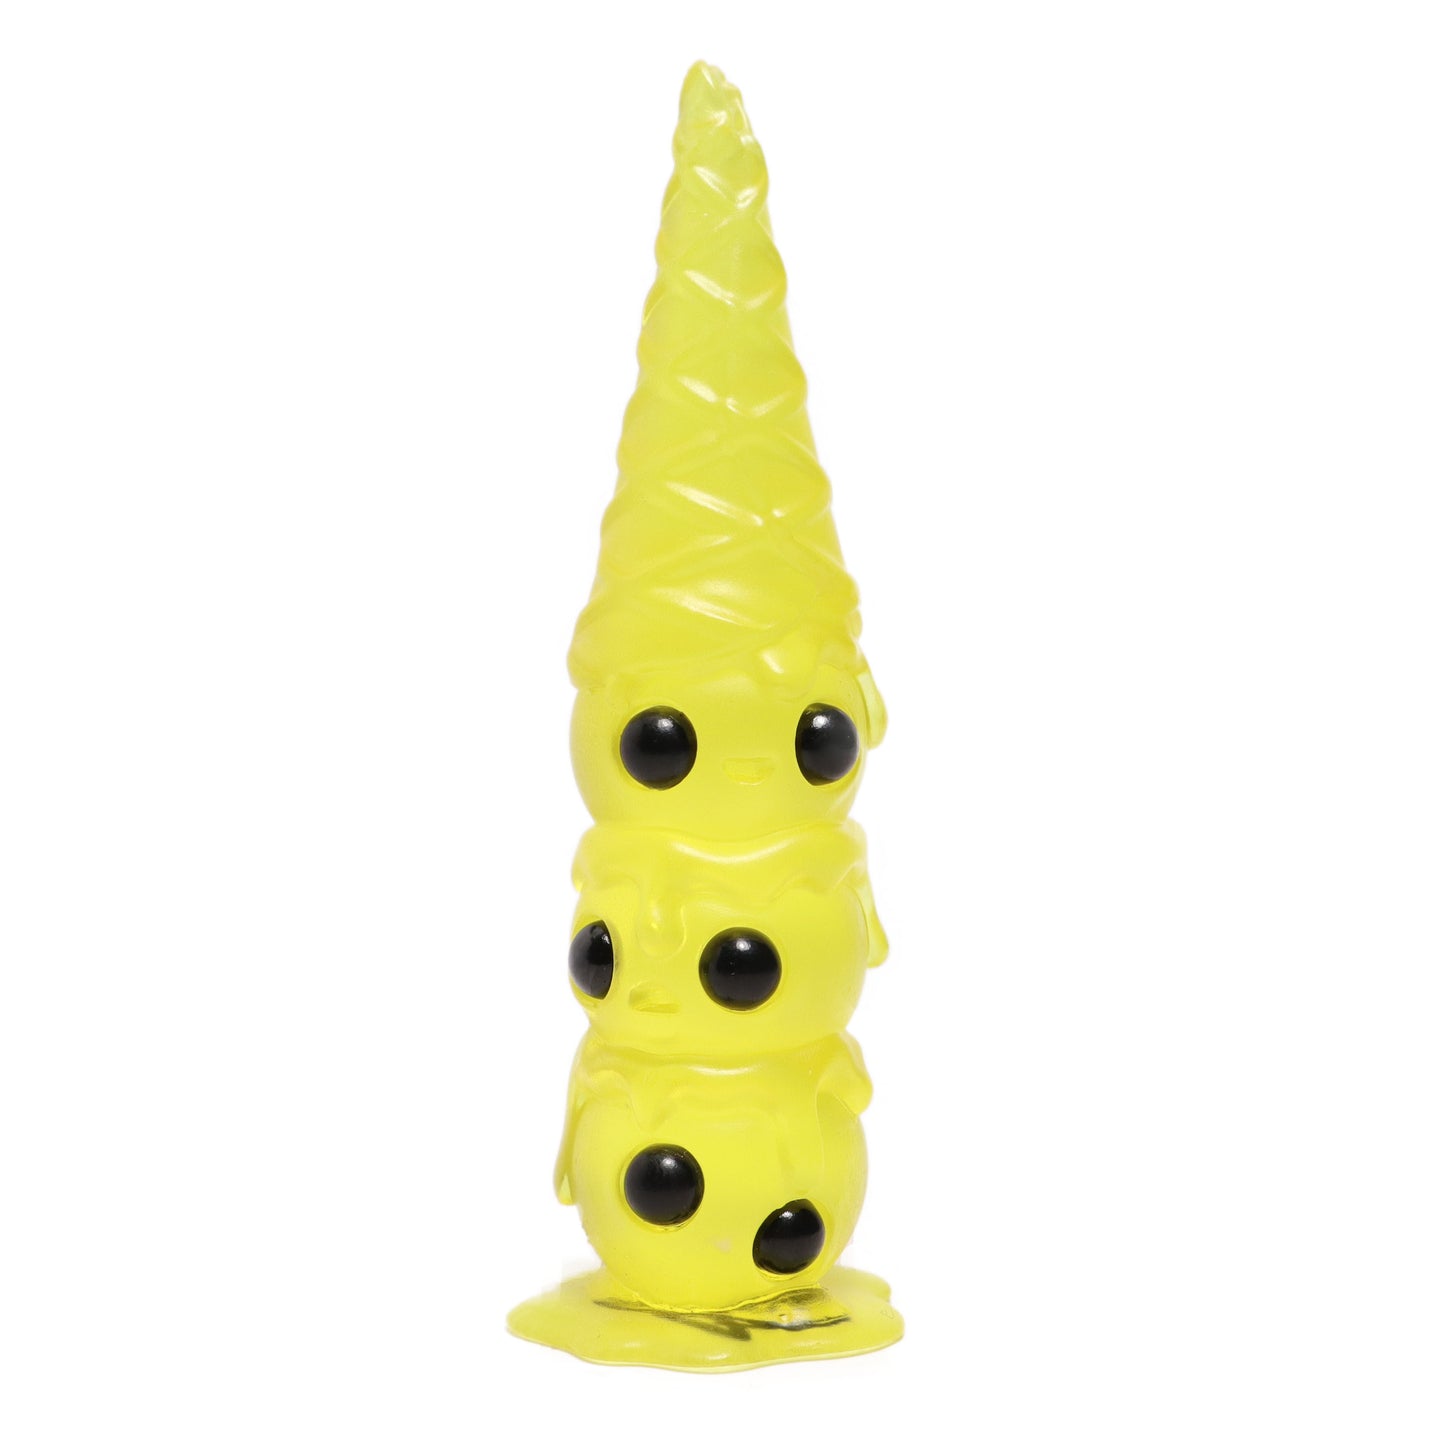 This is Wafull Lemon Dropped Limited Edition Resin Figure